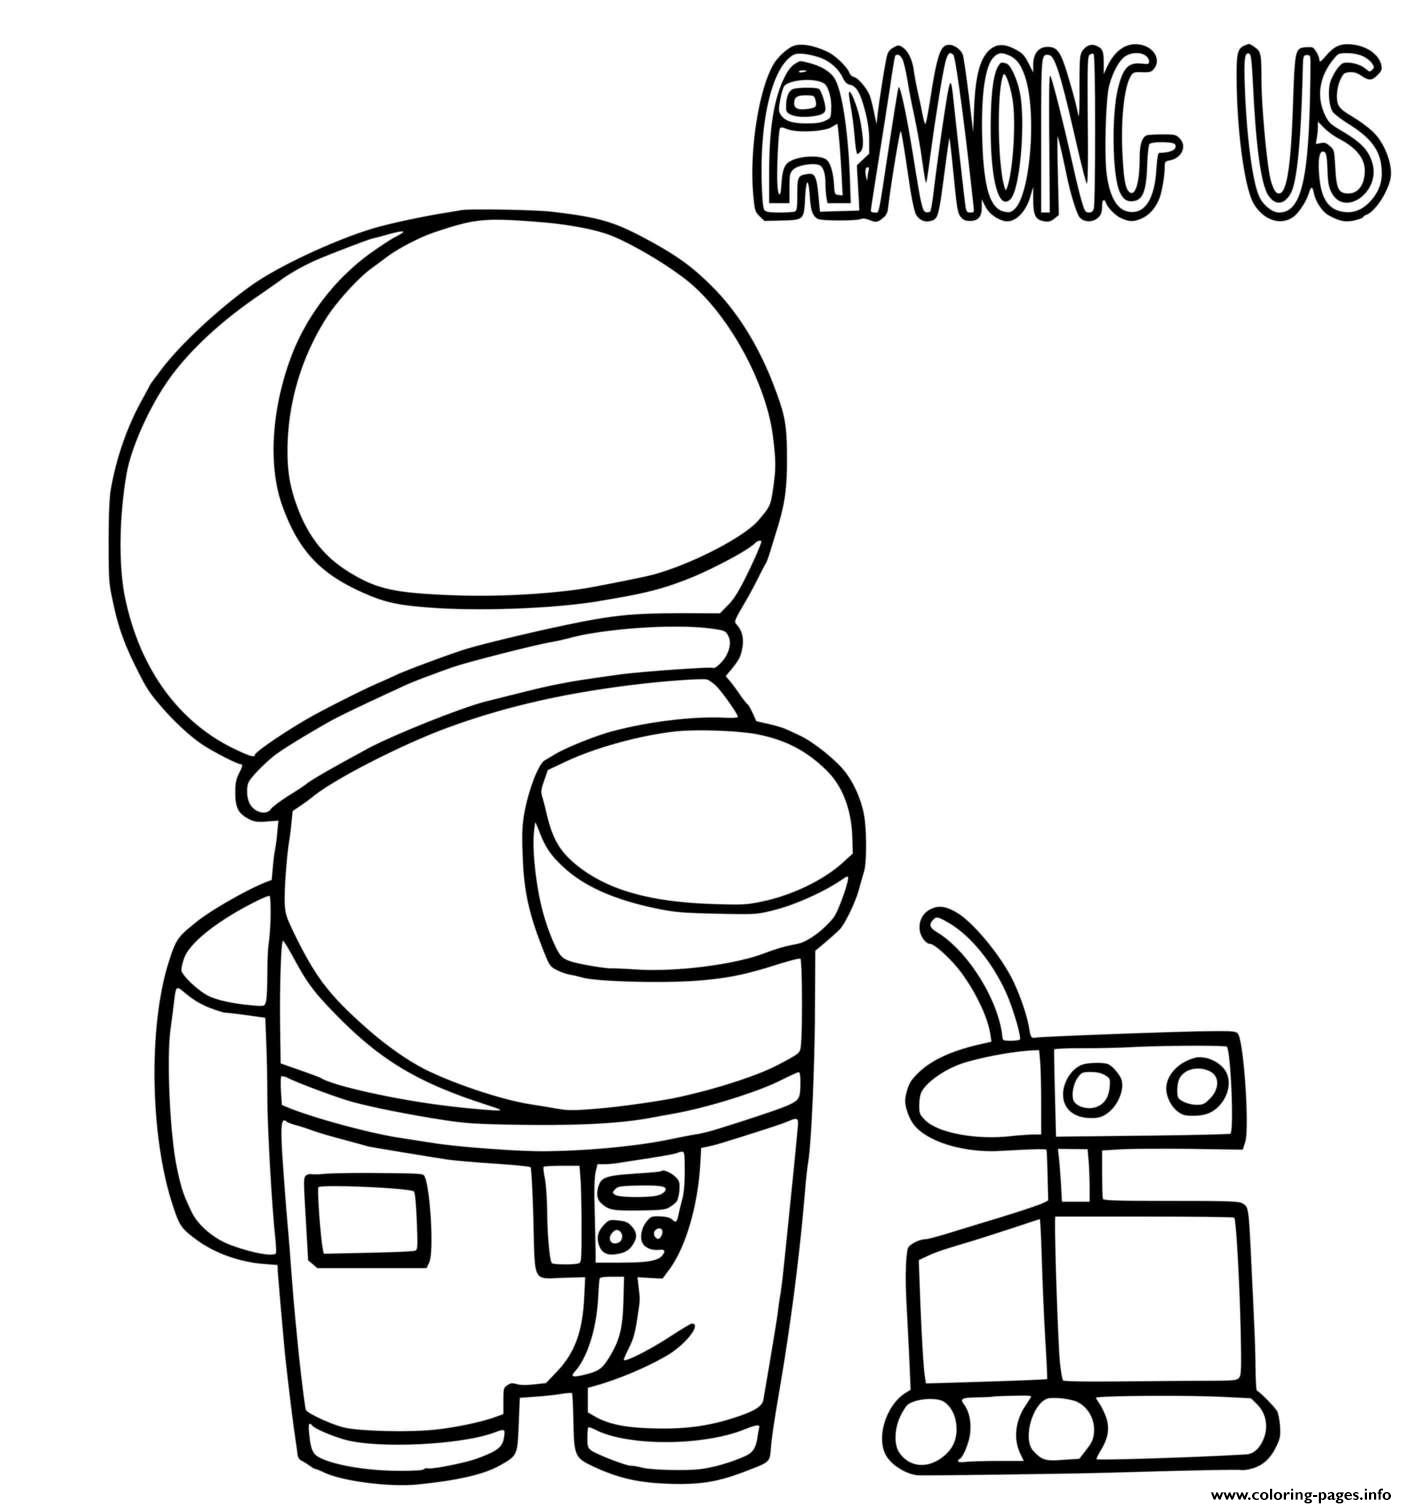 An Astronaut Among Us And A Robot Coloring Page Printable avec Among Us Colorier